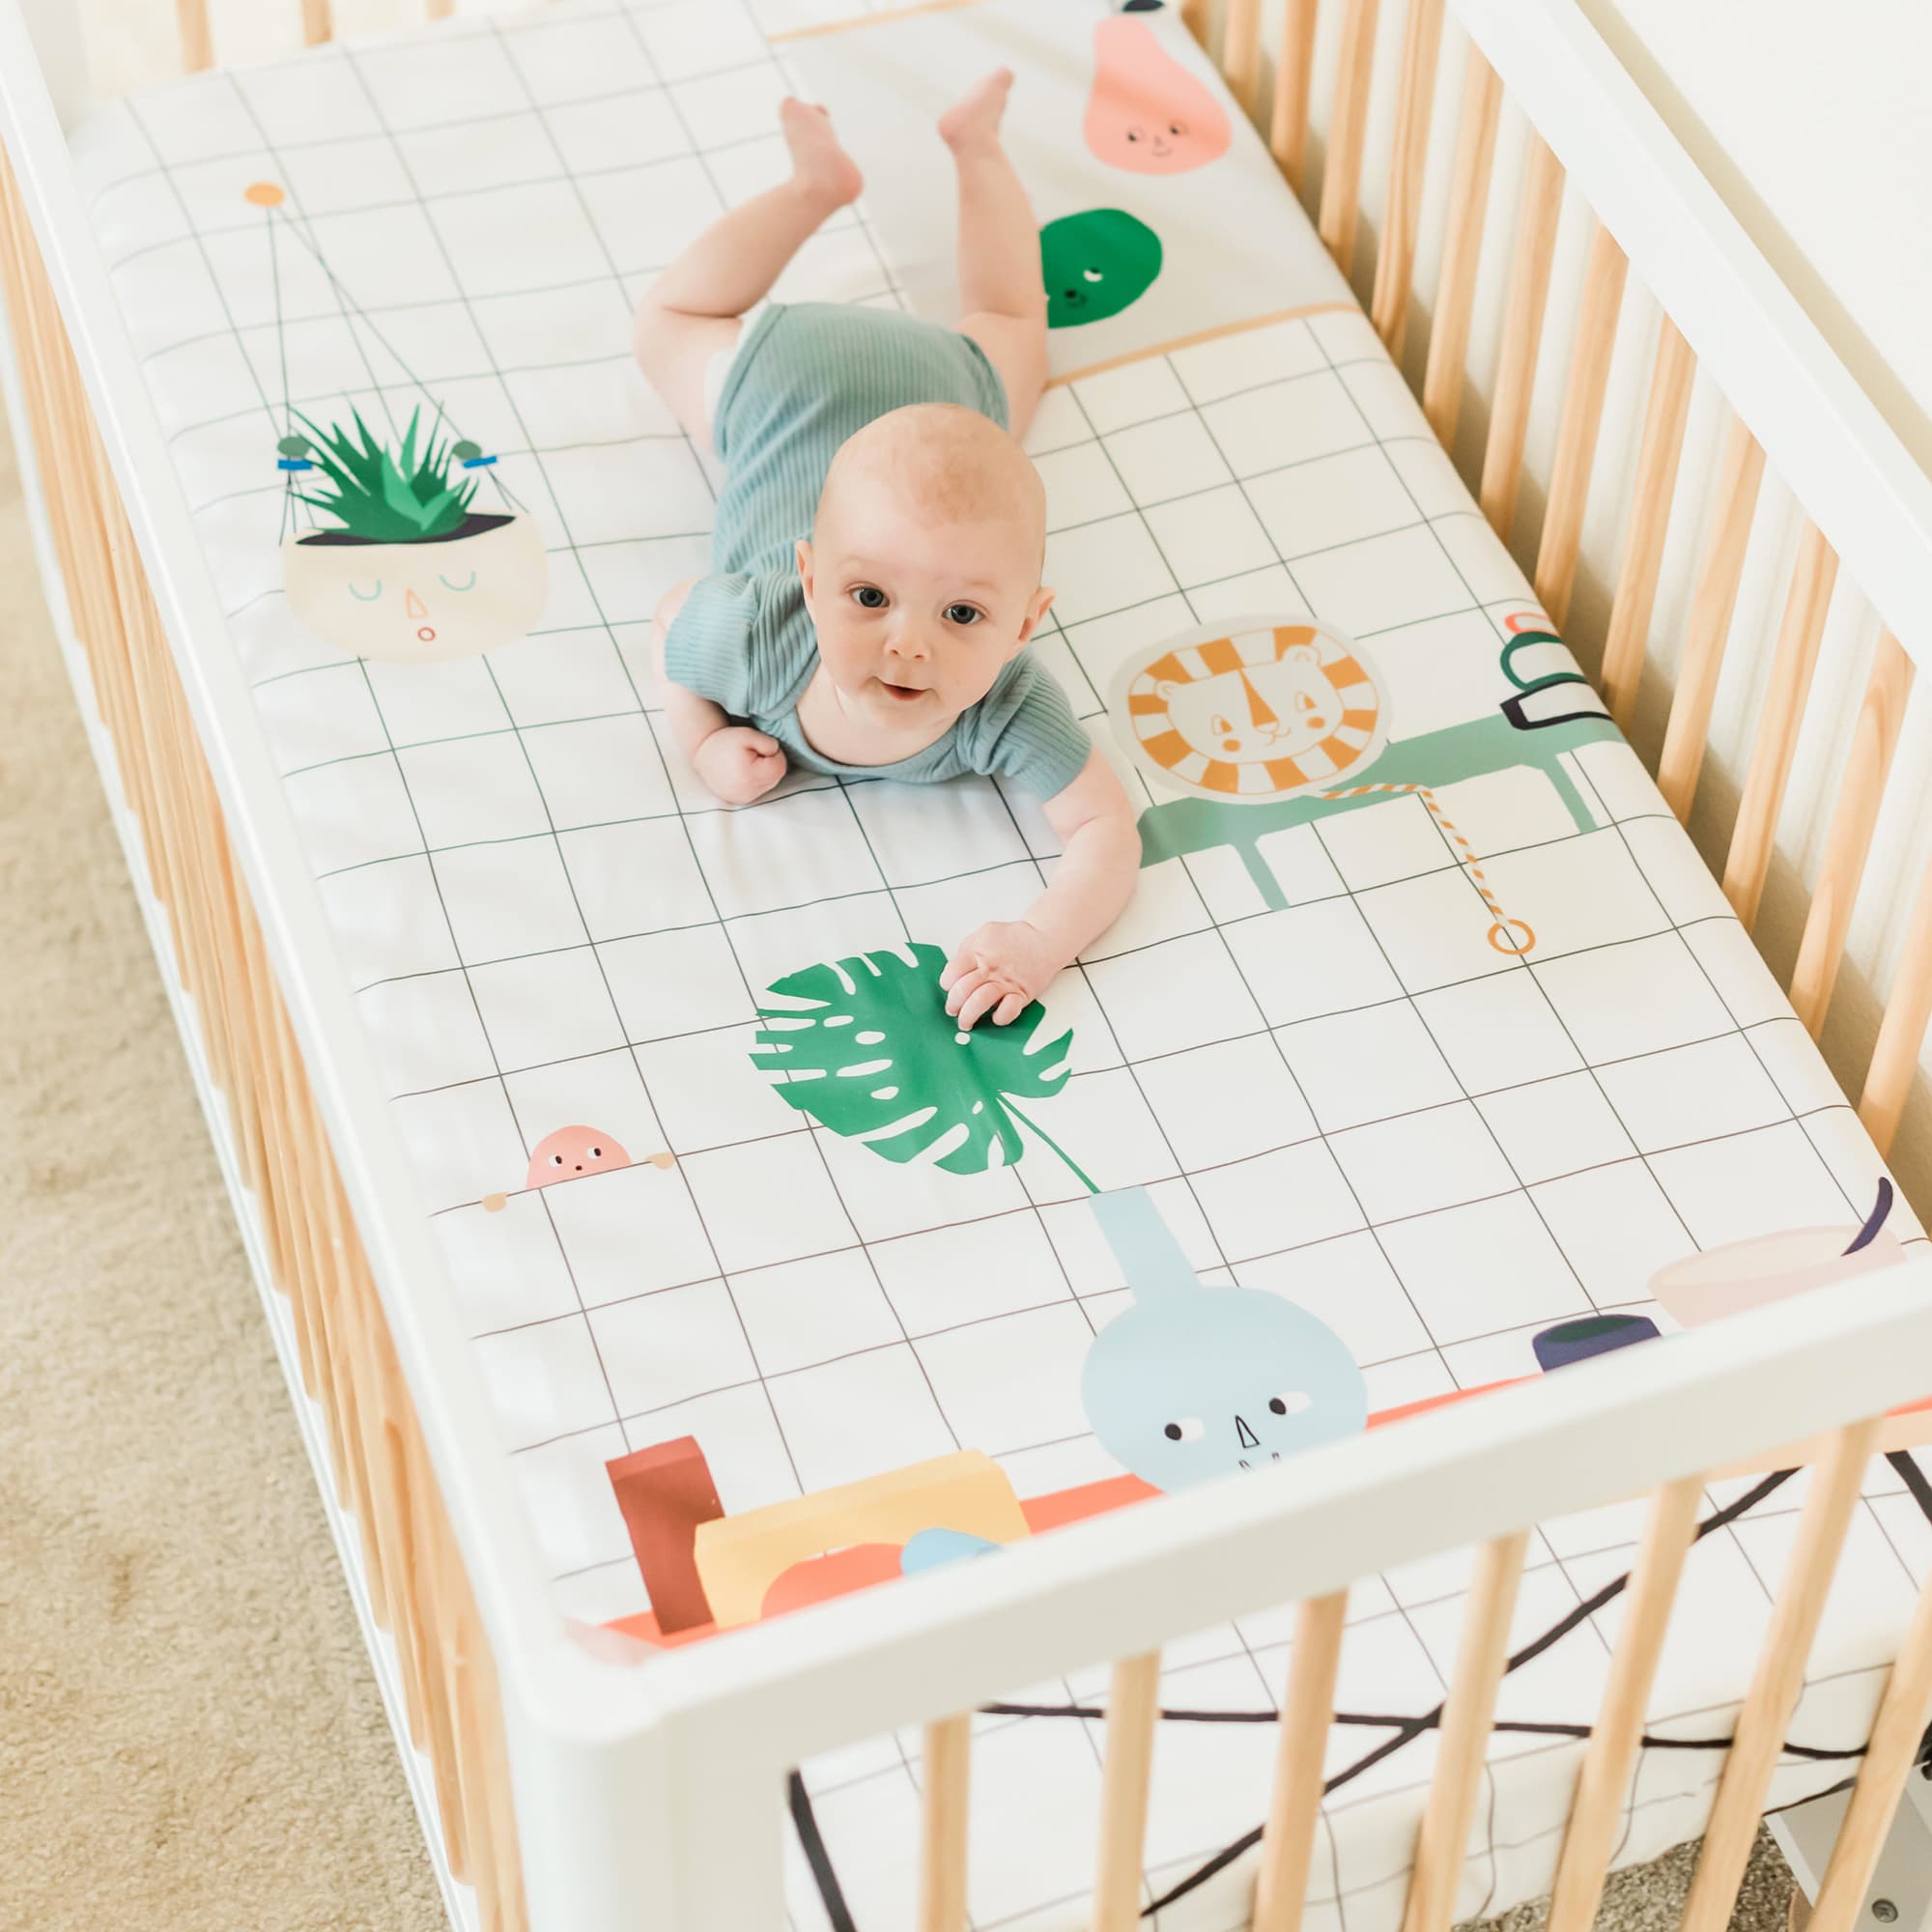 Baby's Room crib sheet by Rookie Humans. Modern crib sheet design has a hanging planter, painting, and toys.